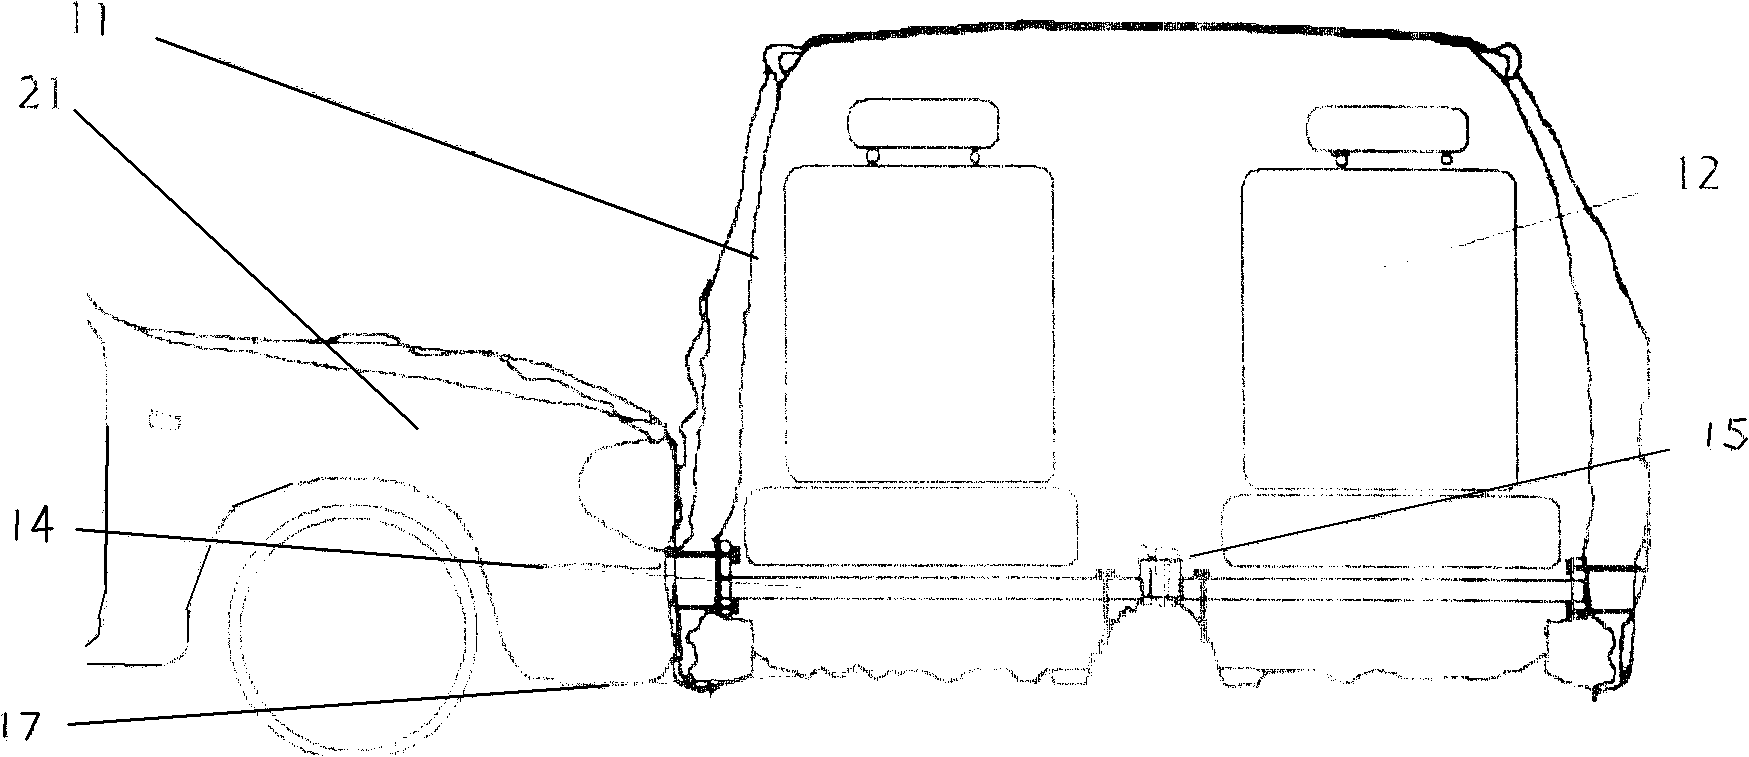 Deformation set for anti-collision on side of manned vehicle, and manned vehicle with the set